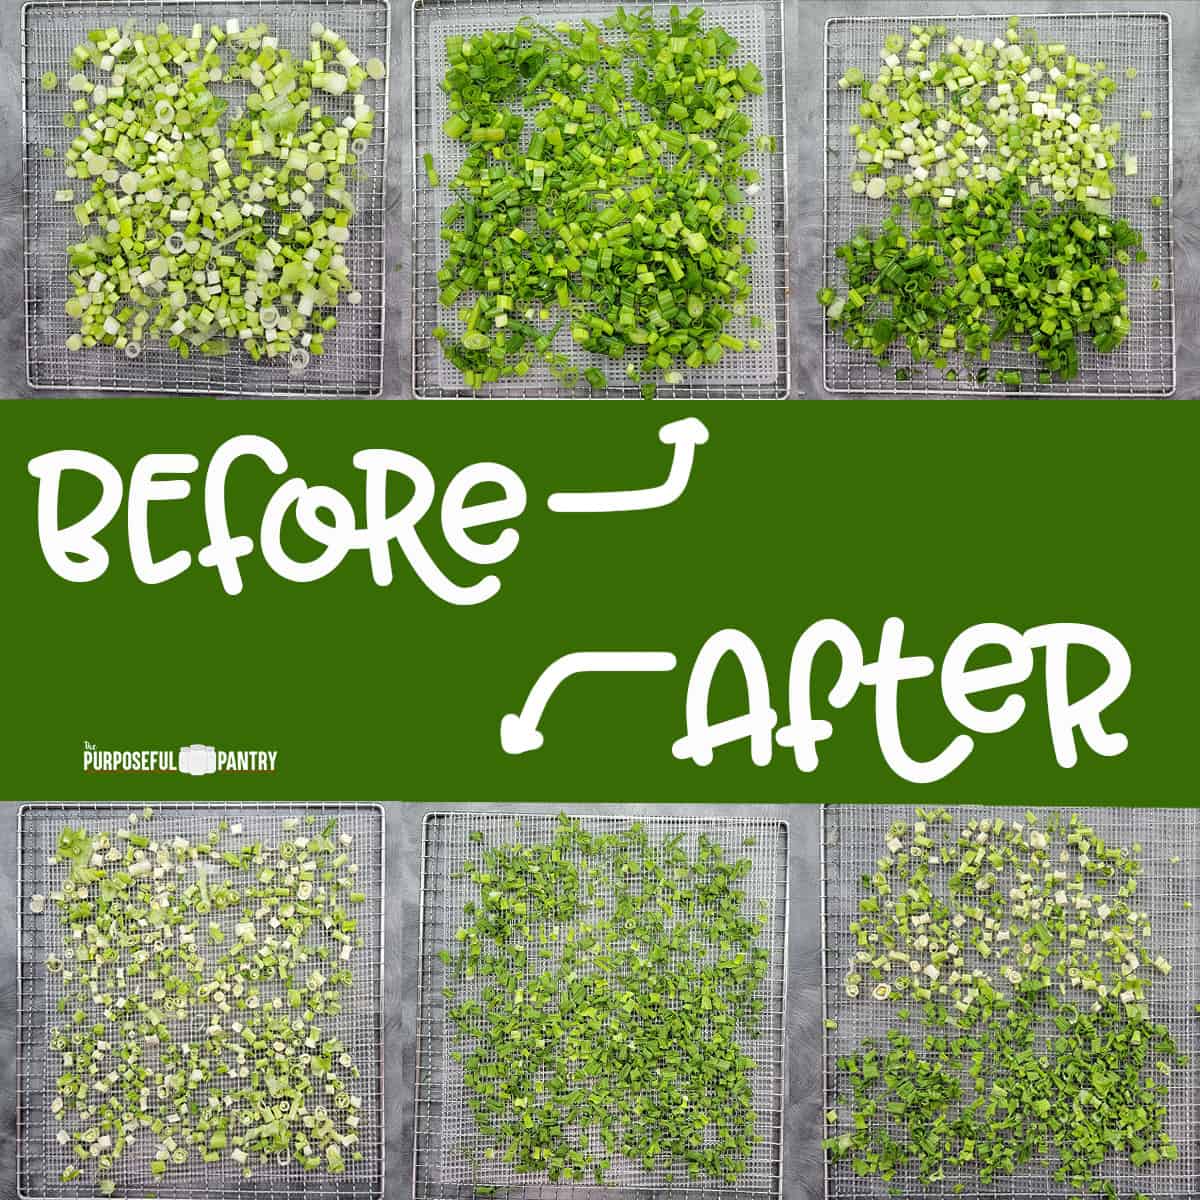 Cosori dehydrator trays filled with green onions before and after drying